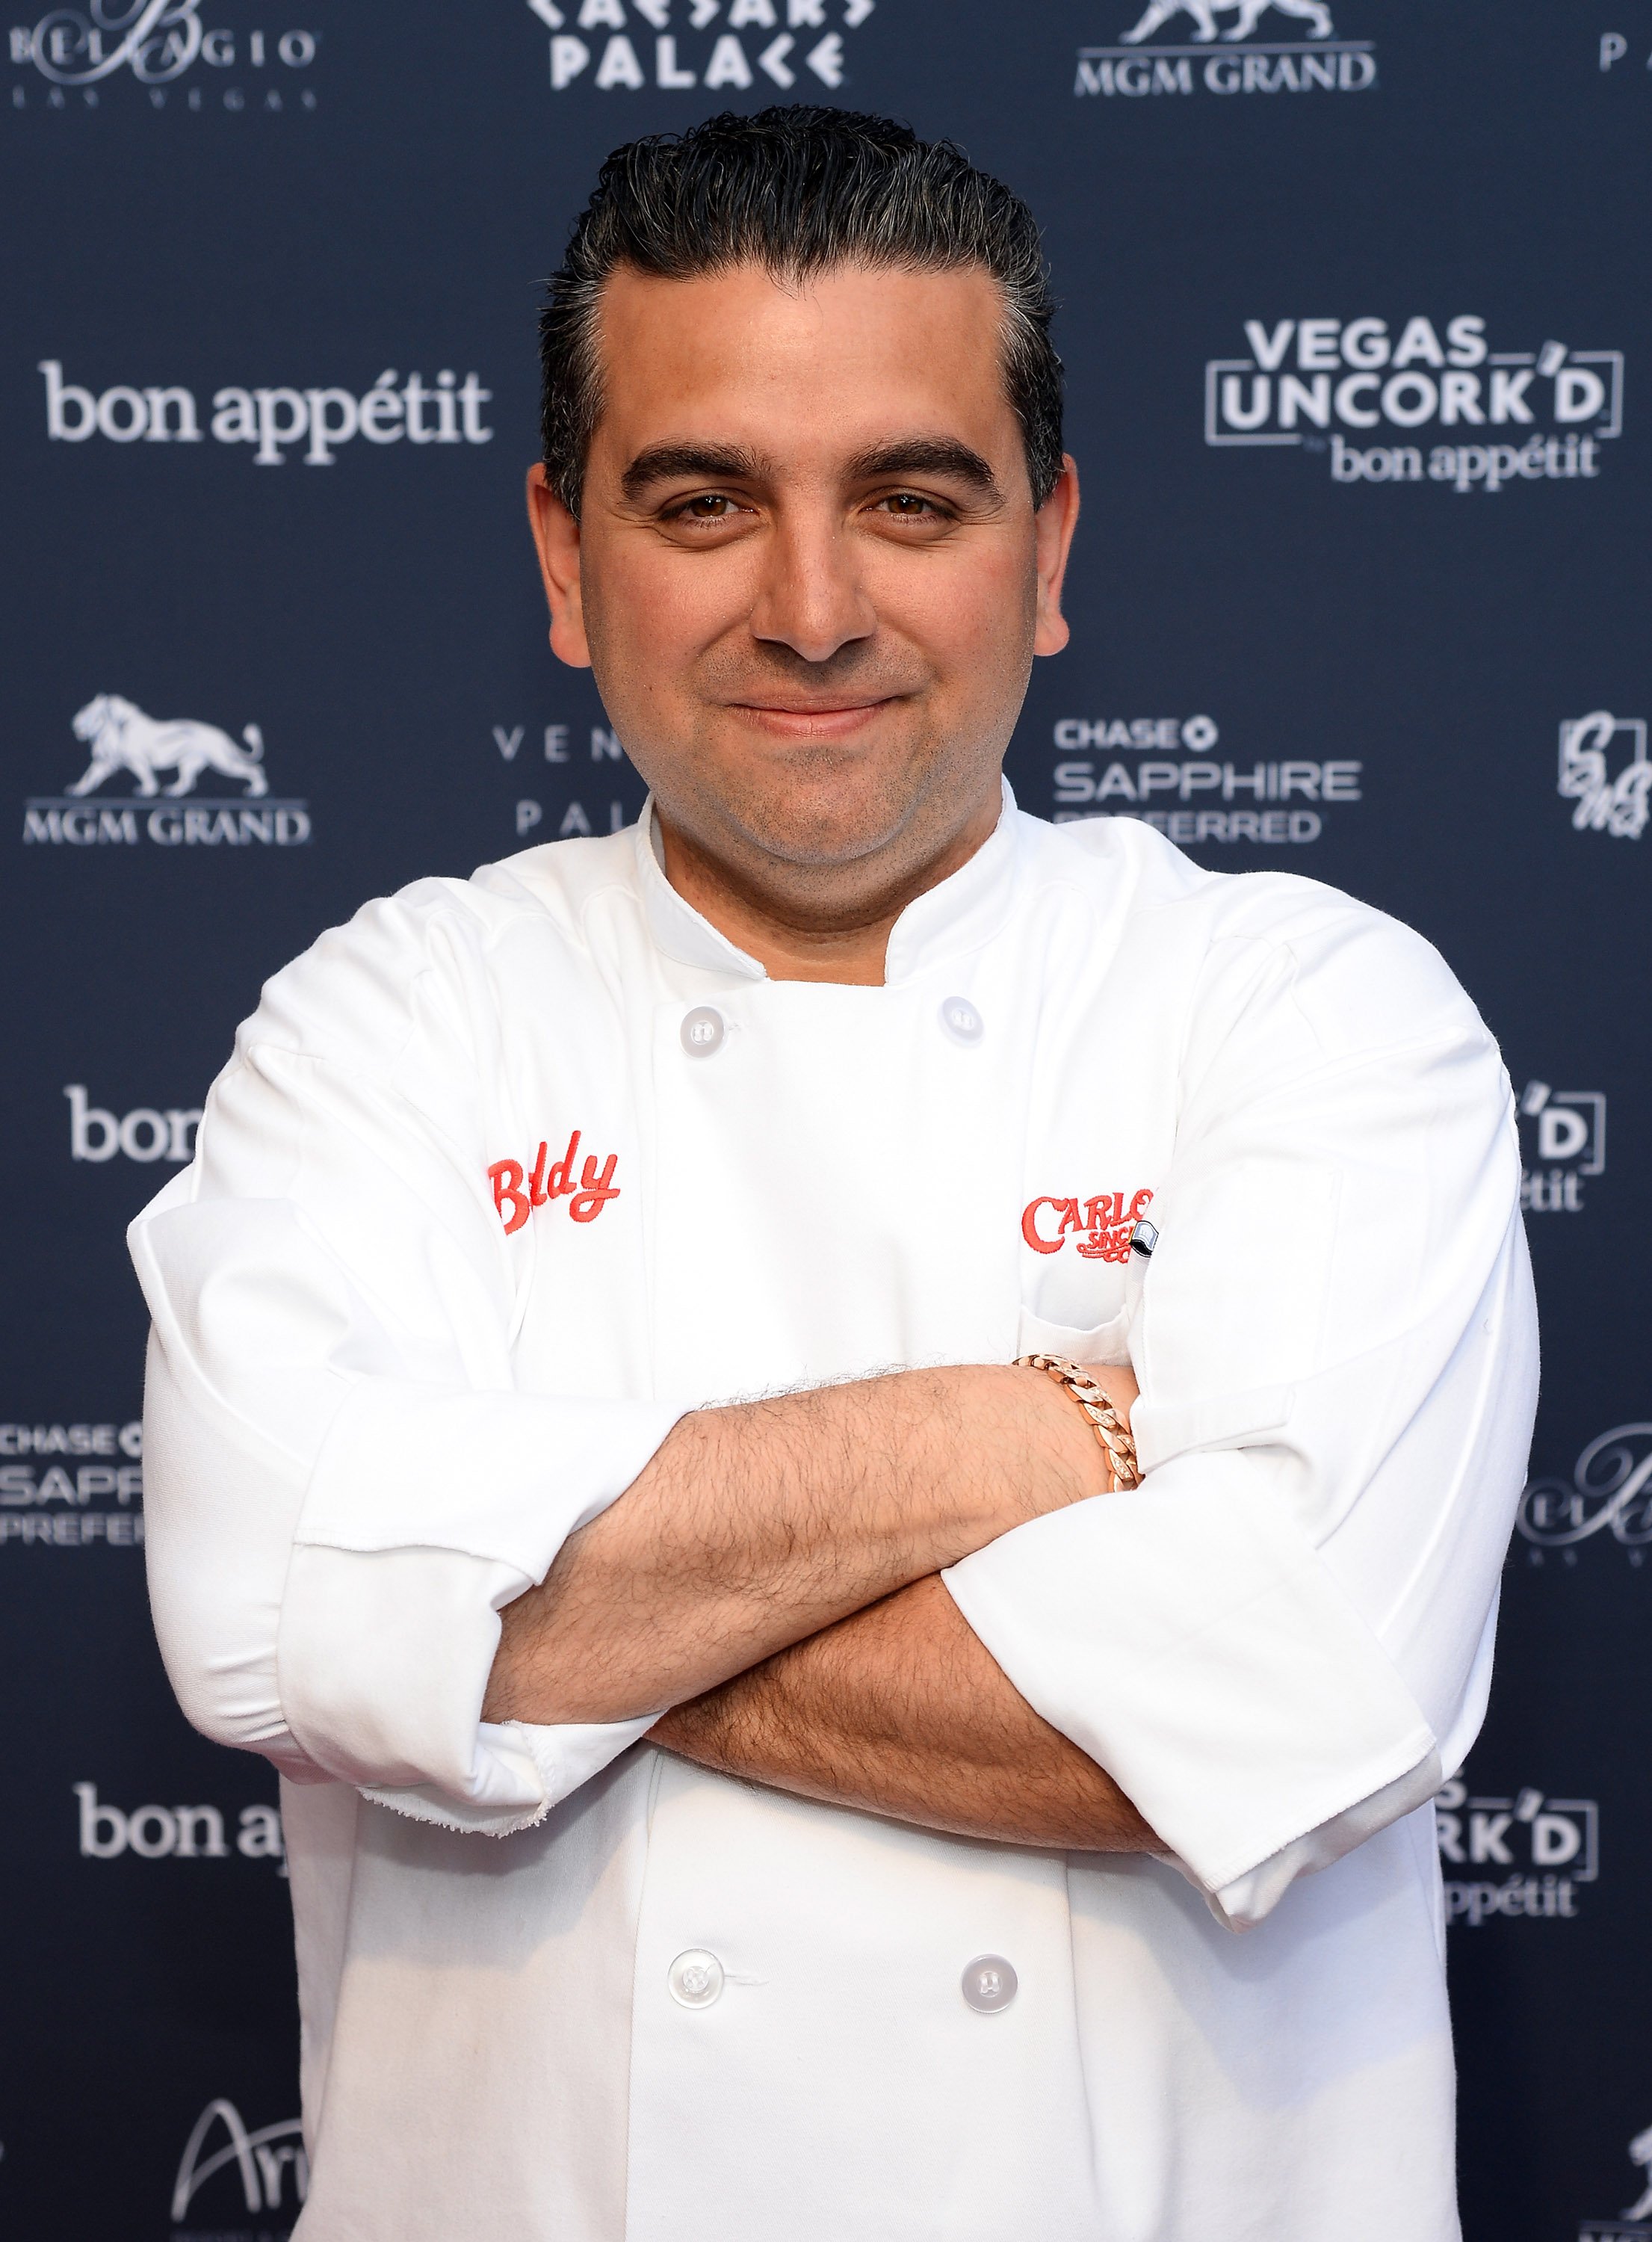 Buddy Valastro attends Vegas Uncork'd in Las Vegas, Nevada on May 9, 2014 | Photo: Getty Images